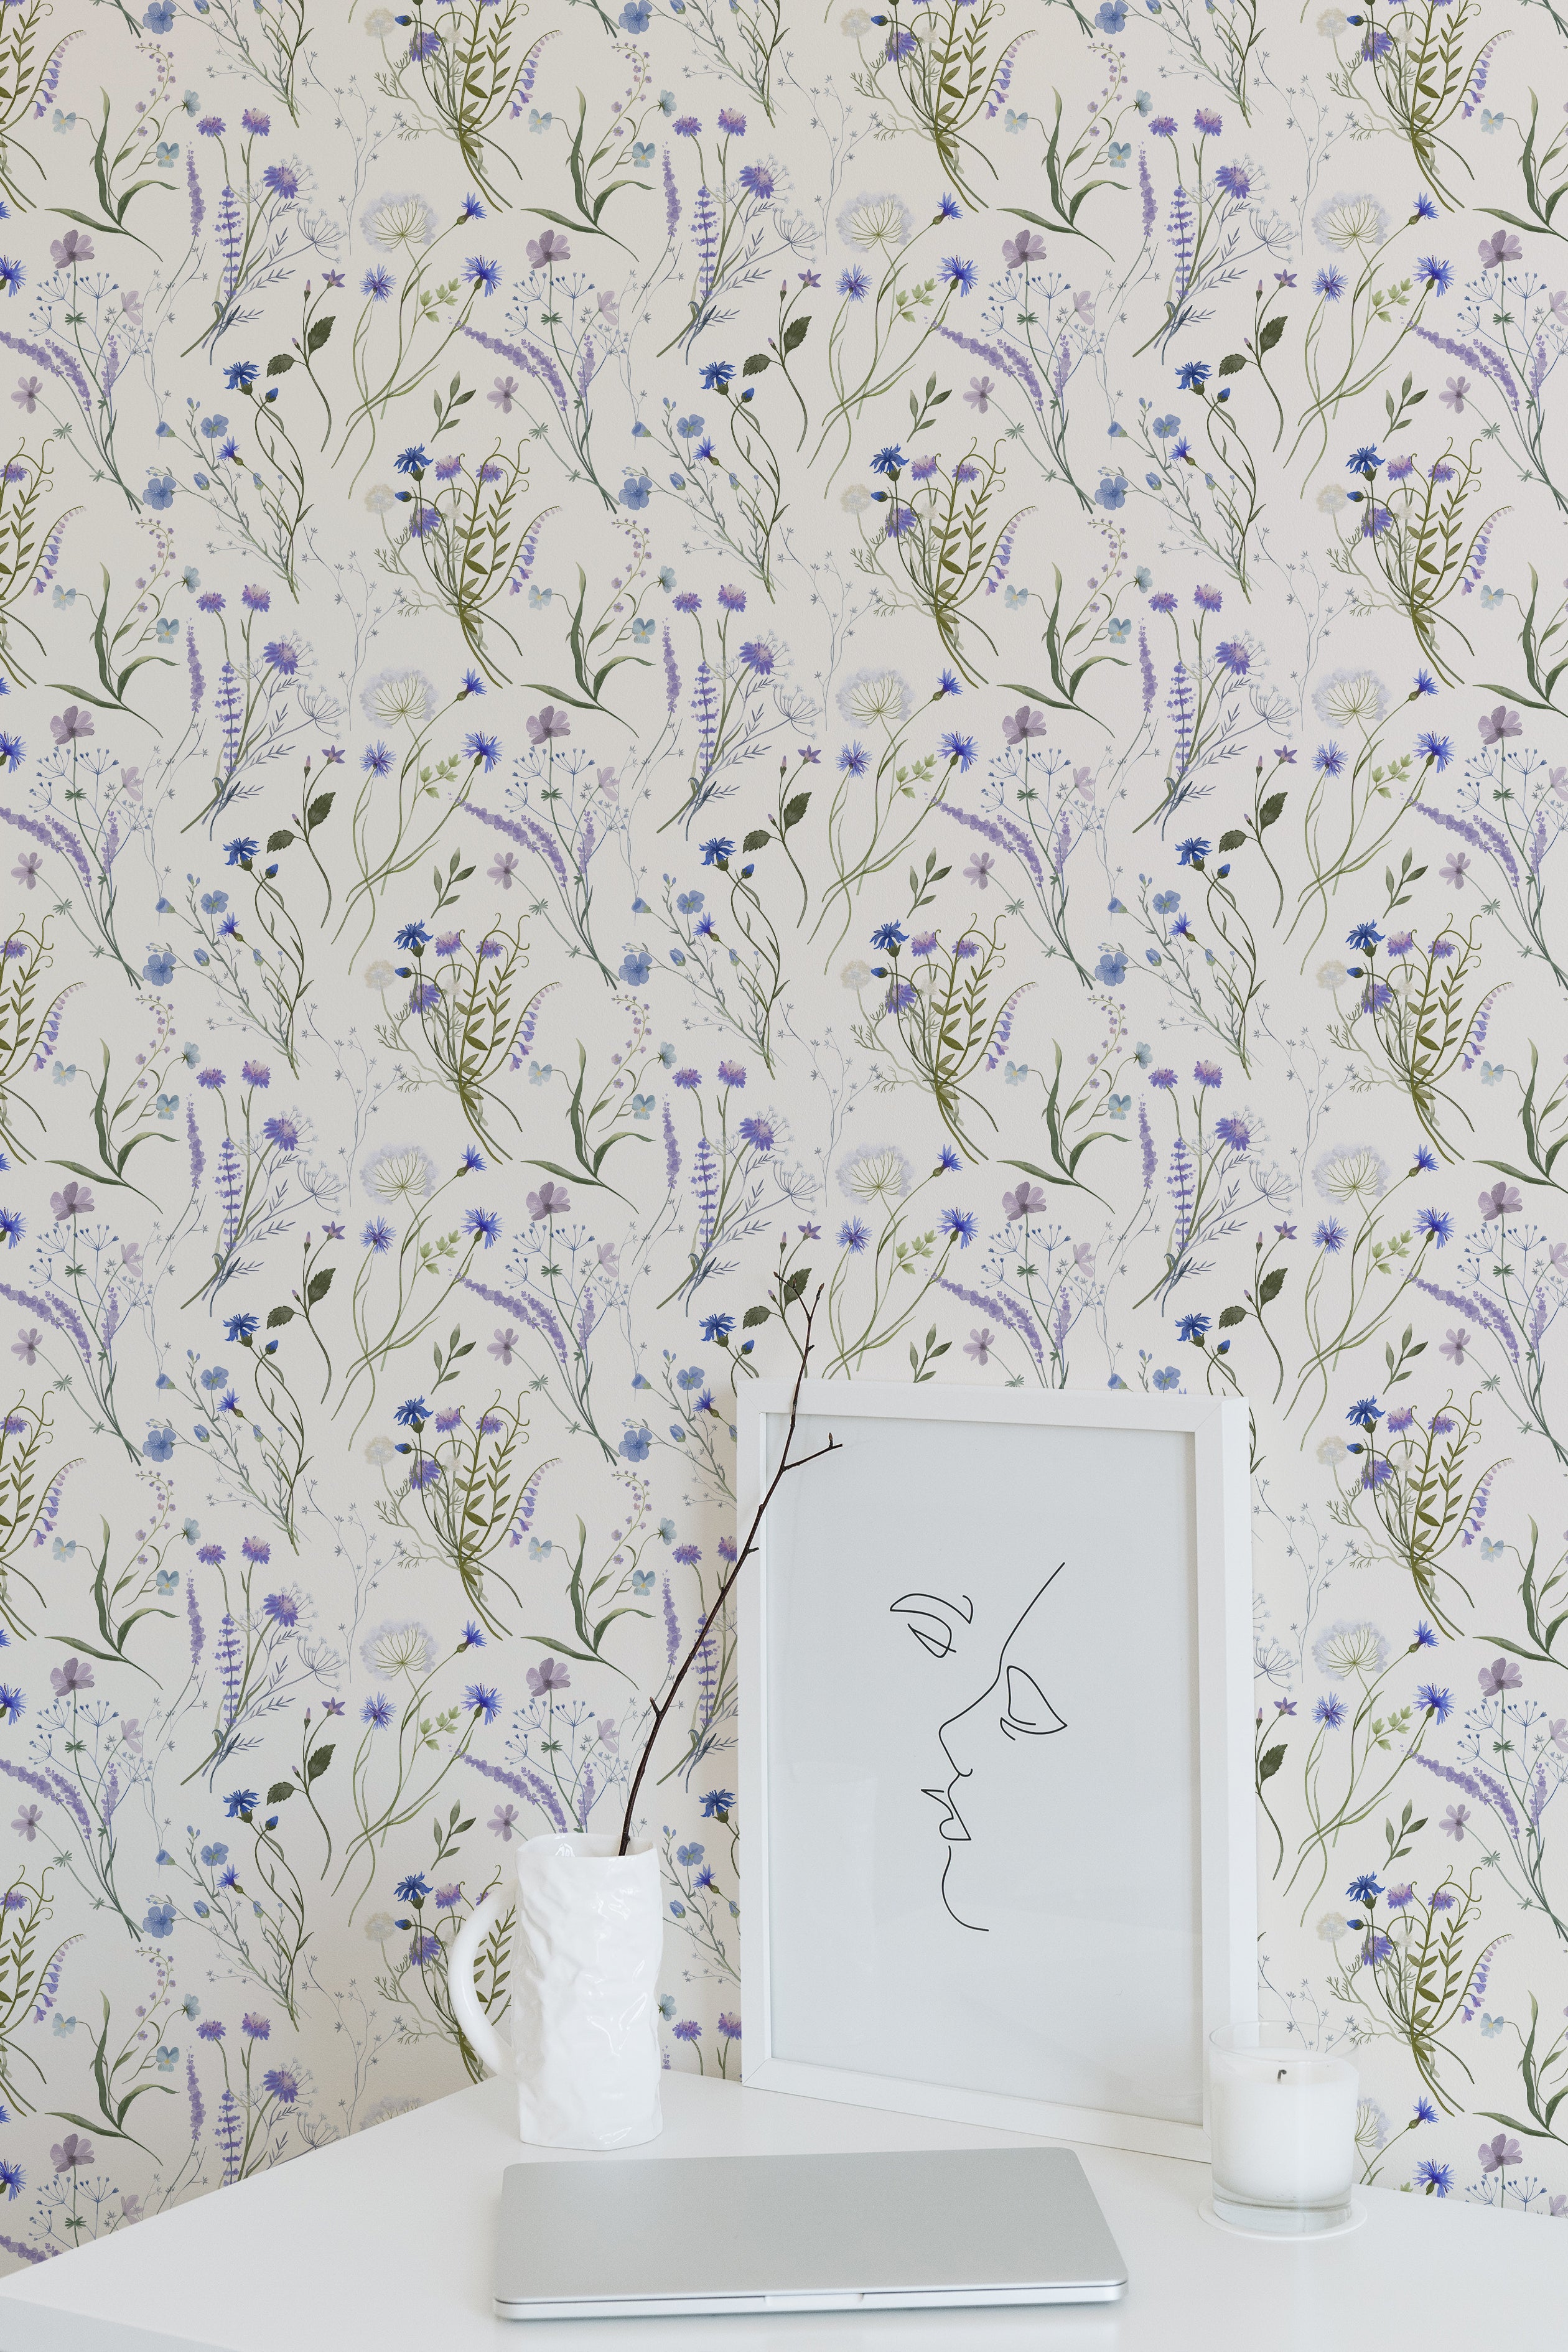 An elegant workspace showcasing the Wildflower Bouquet Wallpaper, featuring a beautiful array of hand-painted wildflowers in shades of blue and purple with green foliage. A minimalist desk with a framed line art and a decorative vase complements the floral backdrop.